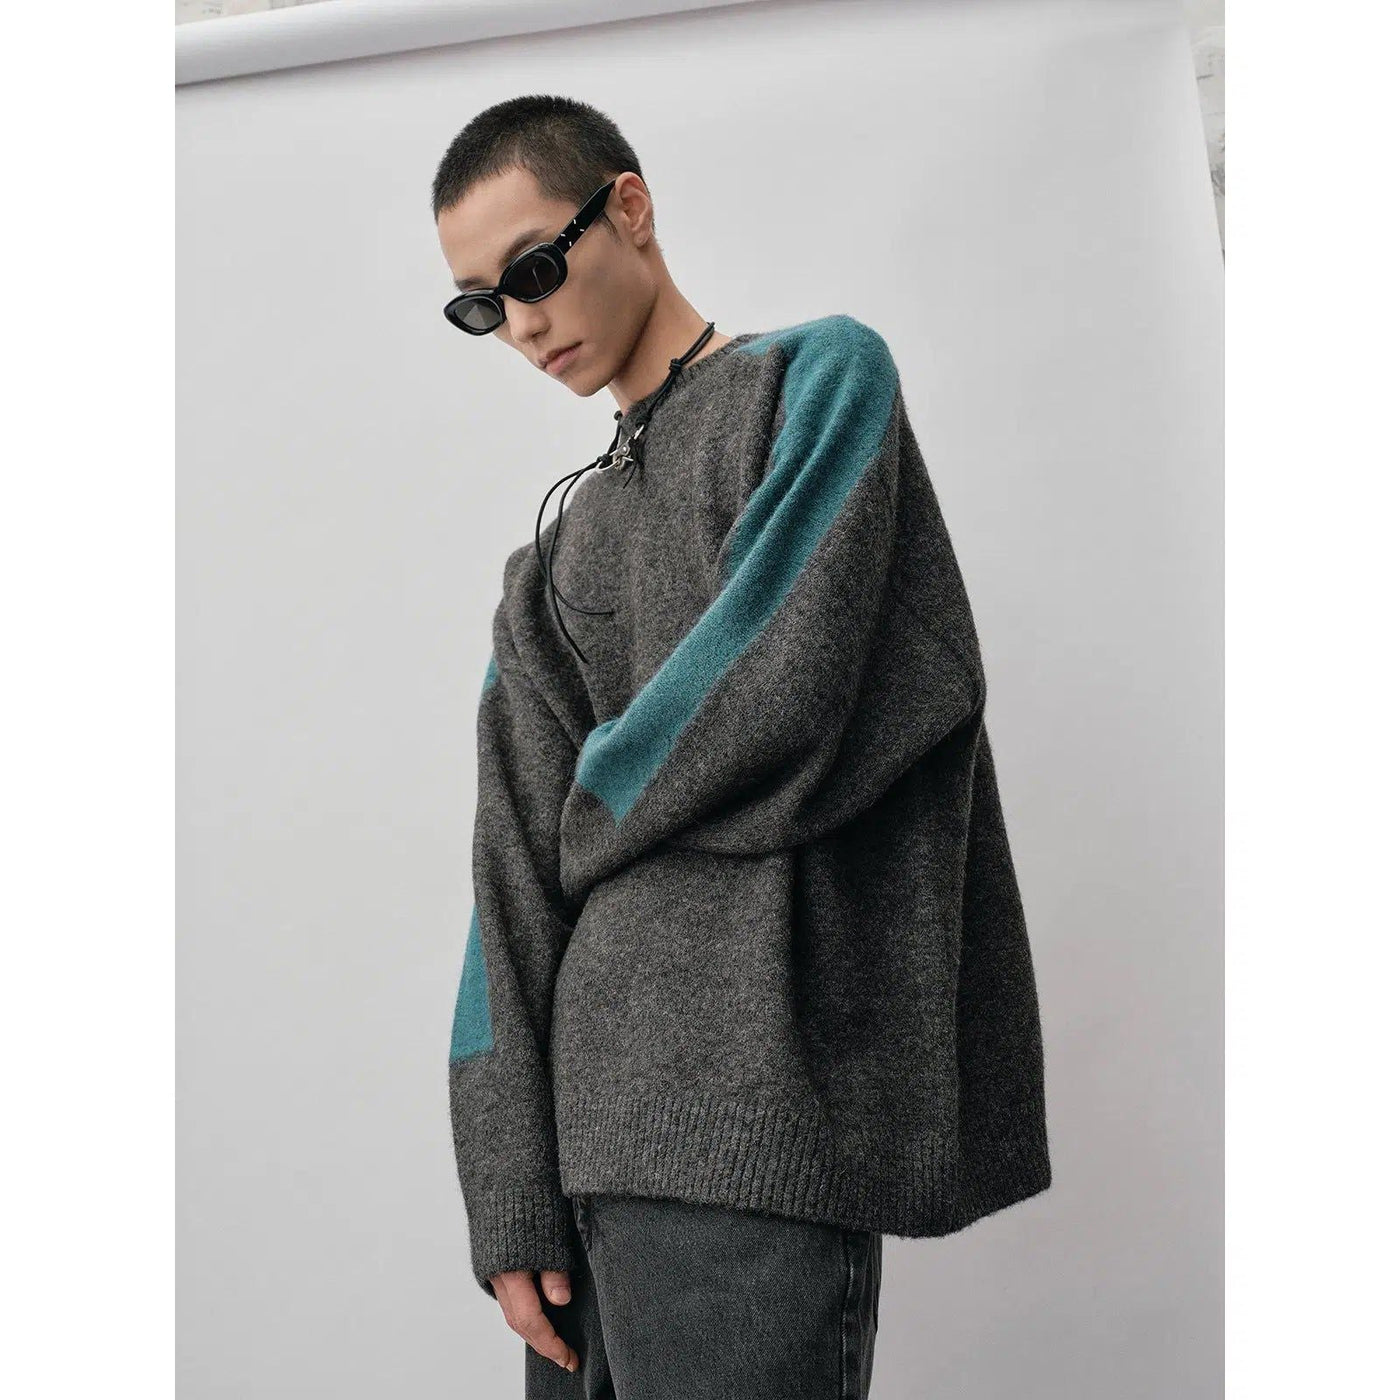 Contrast Sleeve Comfty Sweater Korean Street Fashion Sweater By NANS Shop Online at OH Vault